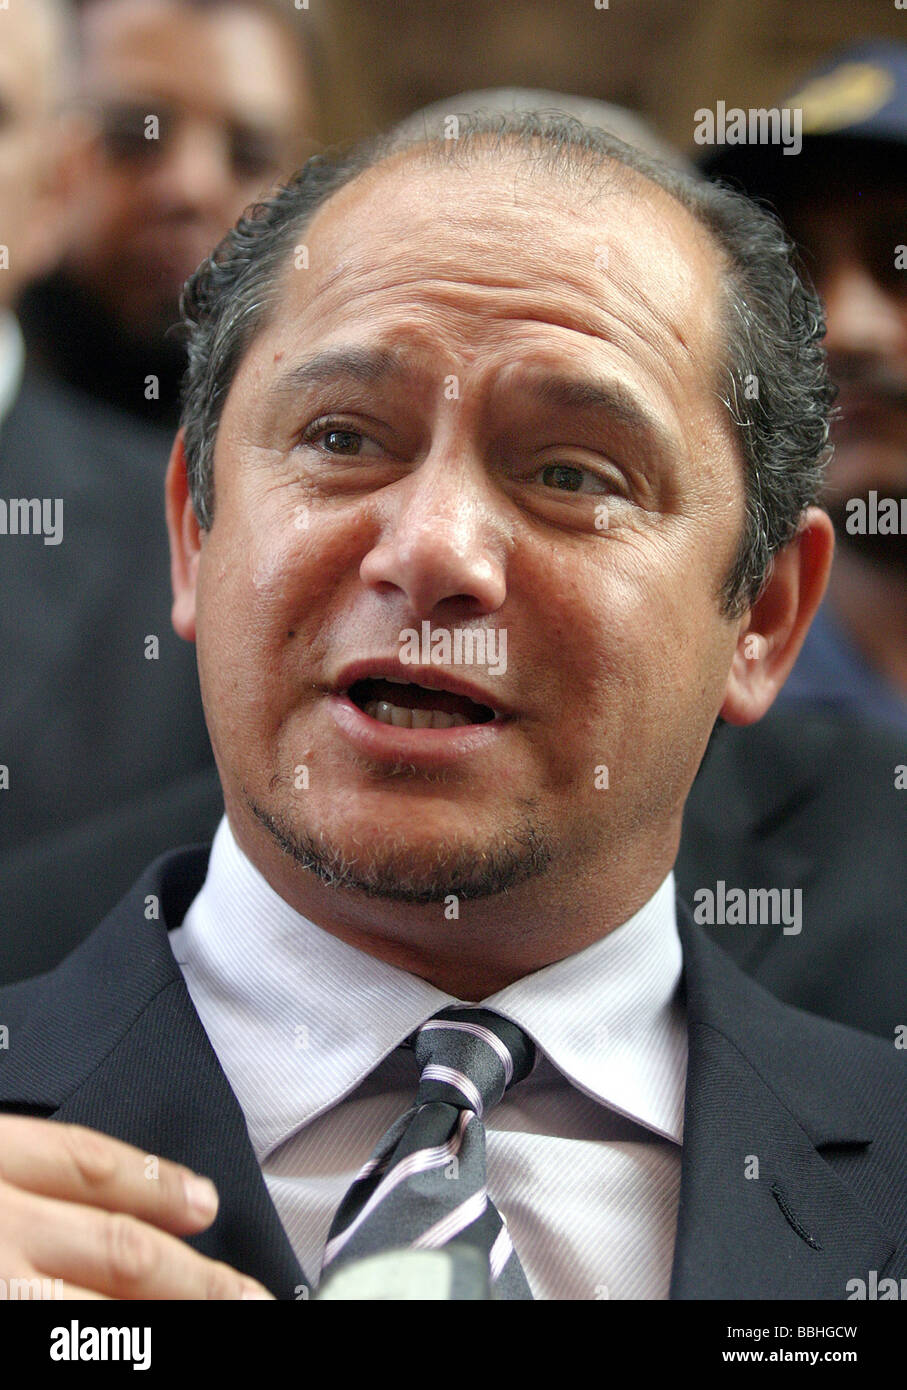 Convicted bussinessman Schabir Shaik addresses the media before leaving the Durban High court on 8 June 2005 after being found Stock Photo